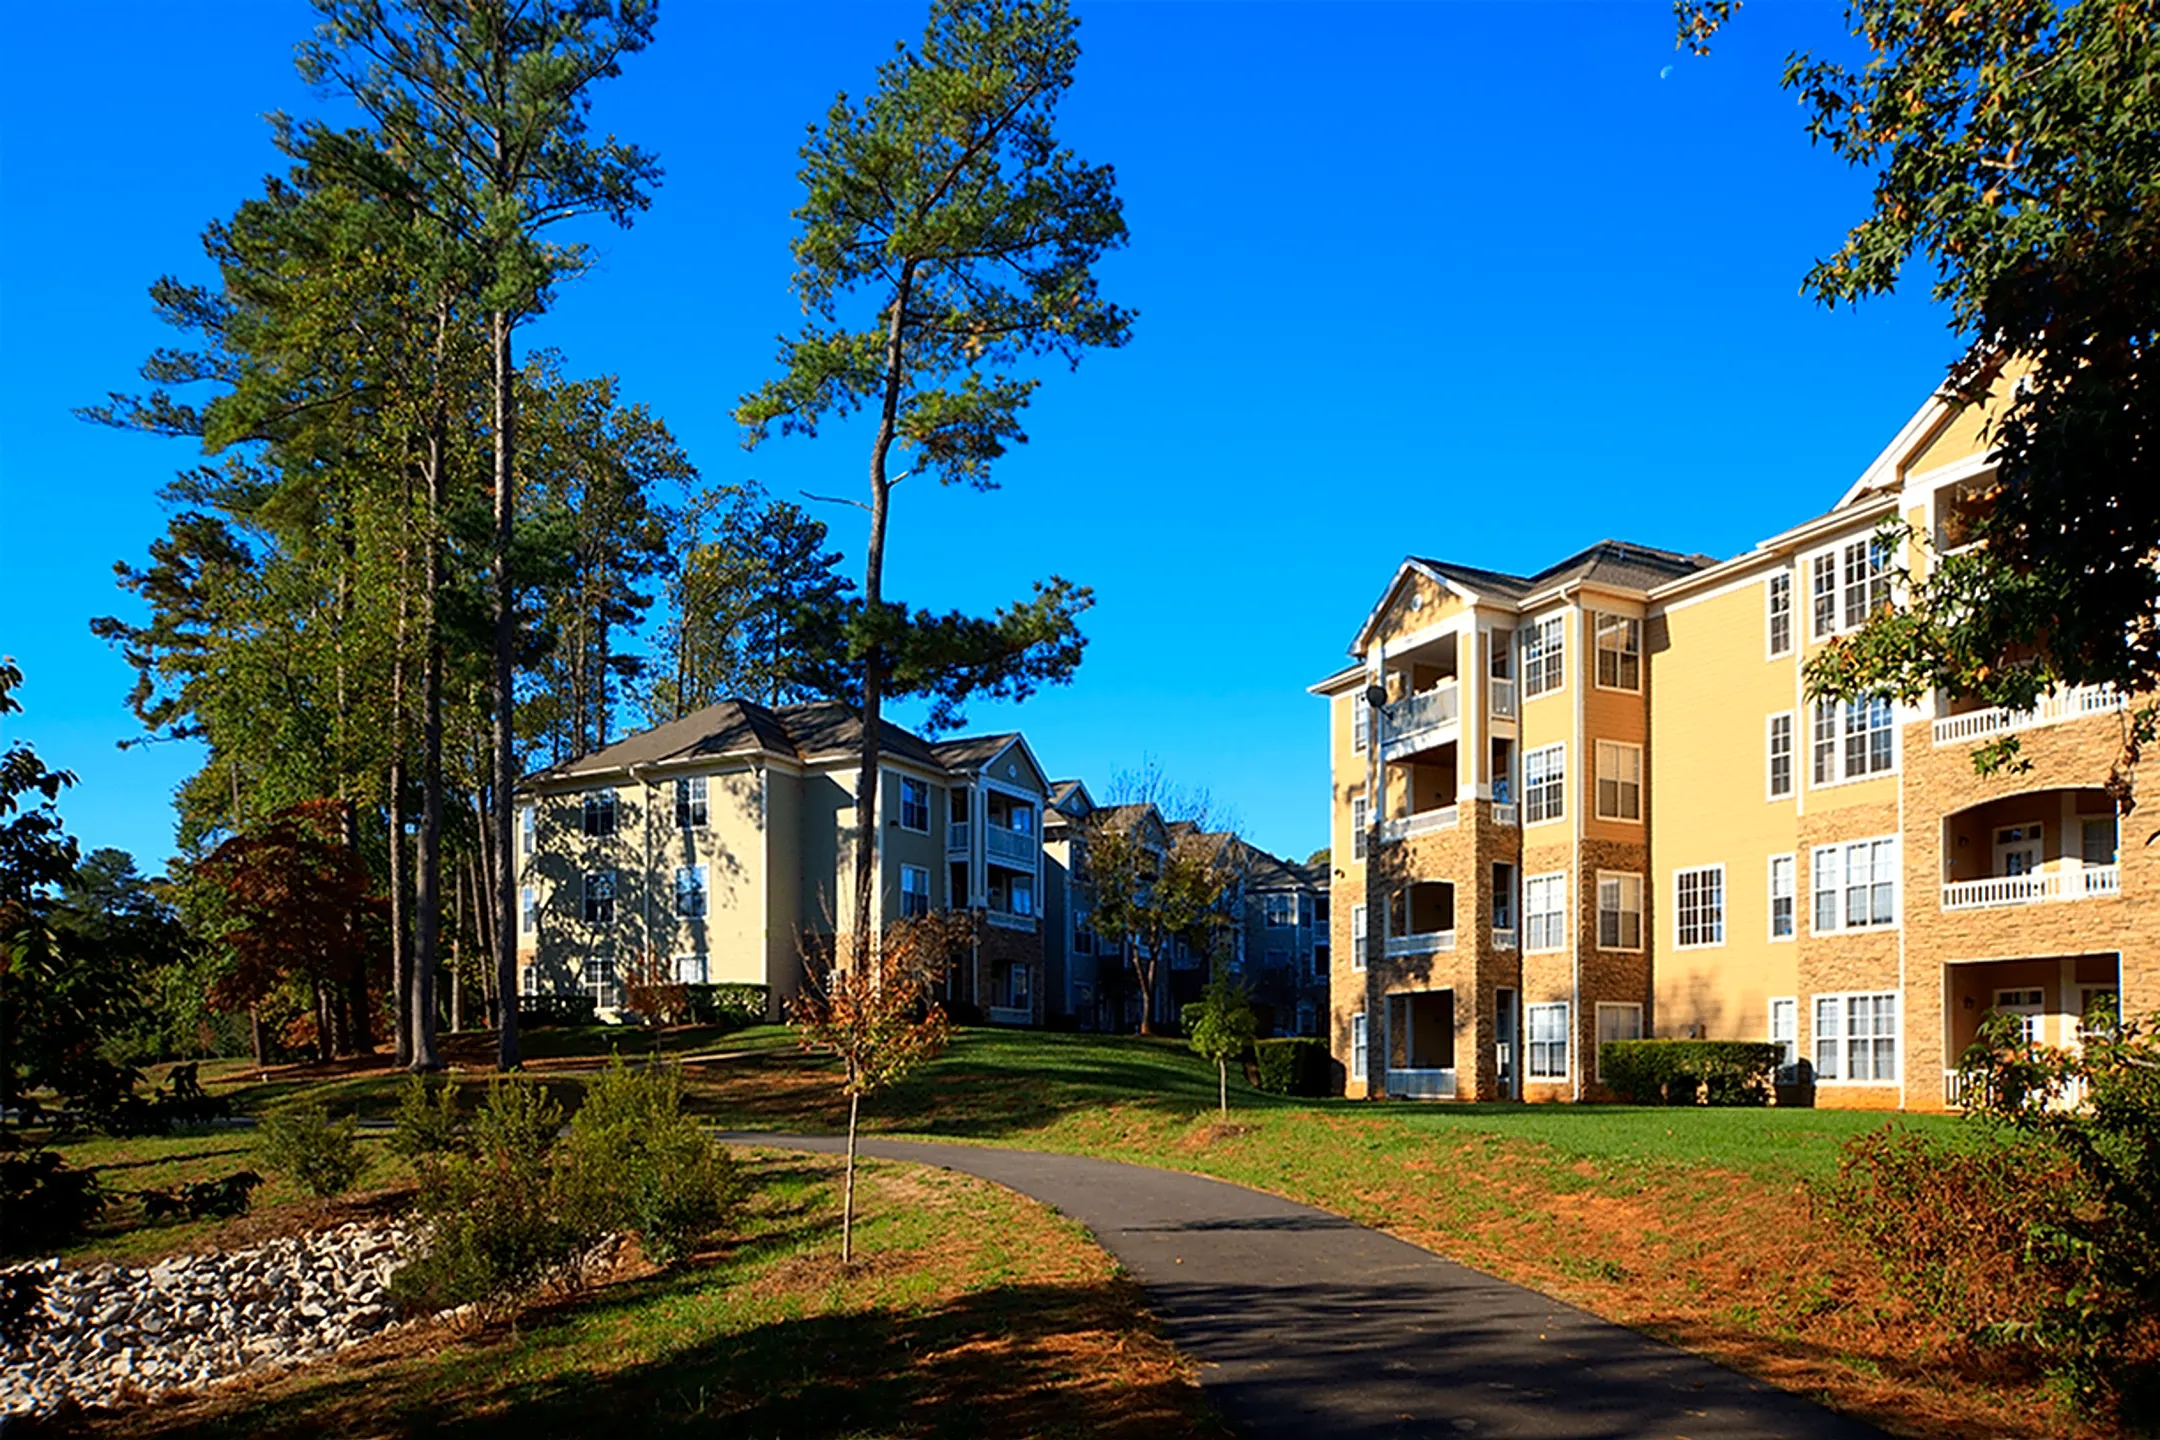 Building - The Lodge at Crossroads - Cary, NC